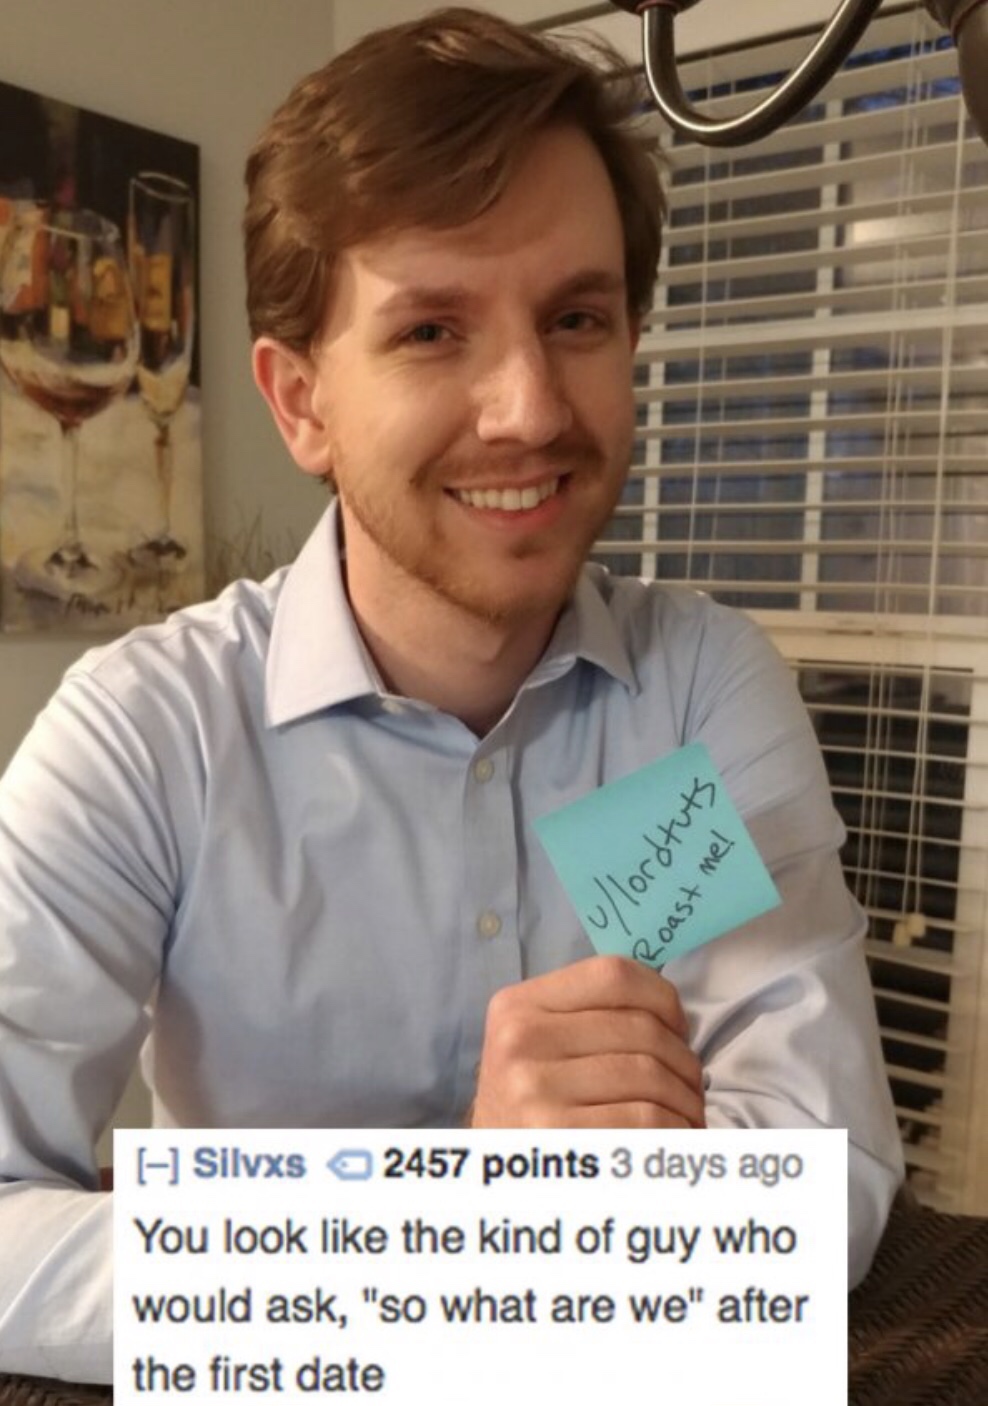 reddit memes - you the type of person roasts - 0lord tuts Roast me! A Silvxs 2457 points 3 days ago You look the kind of guy who would ask, "So what are we" after the first date